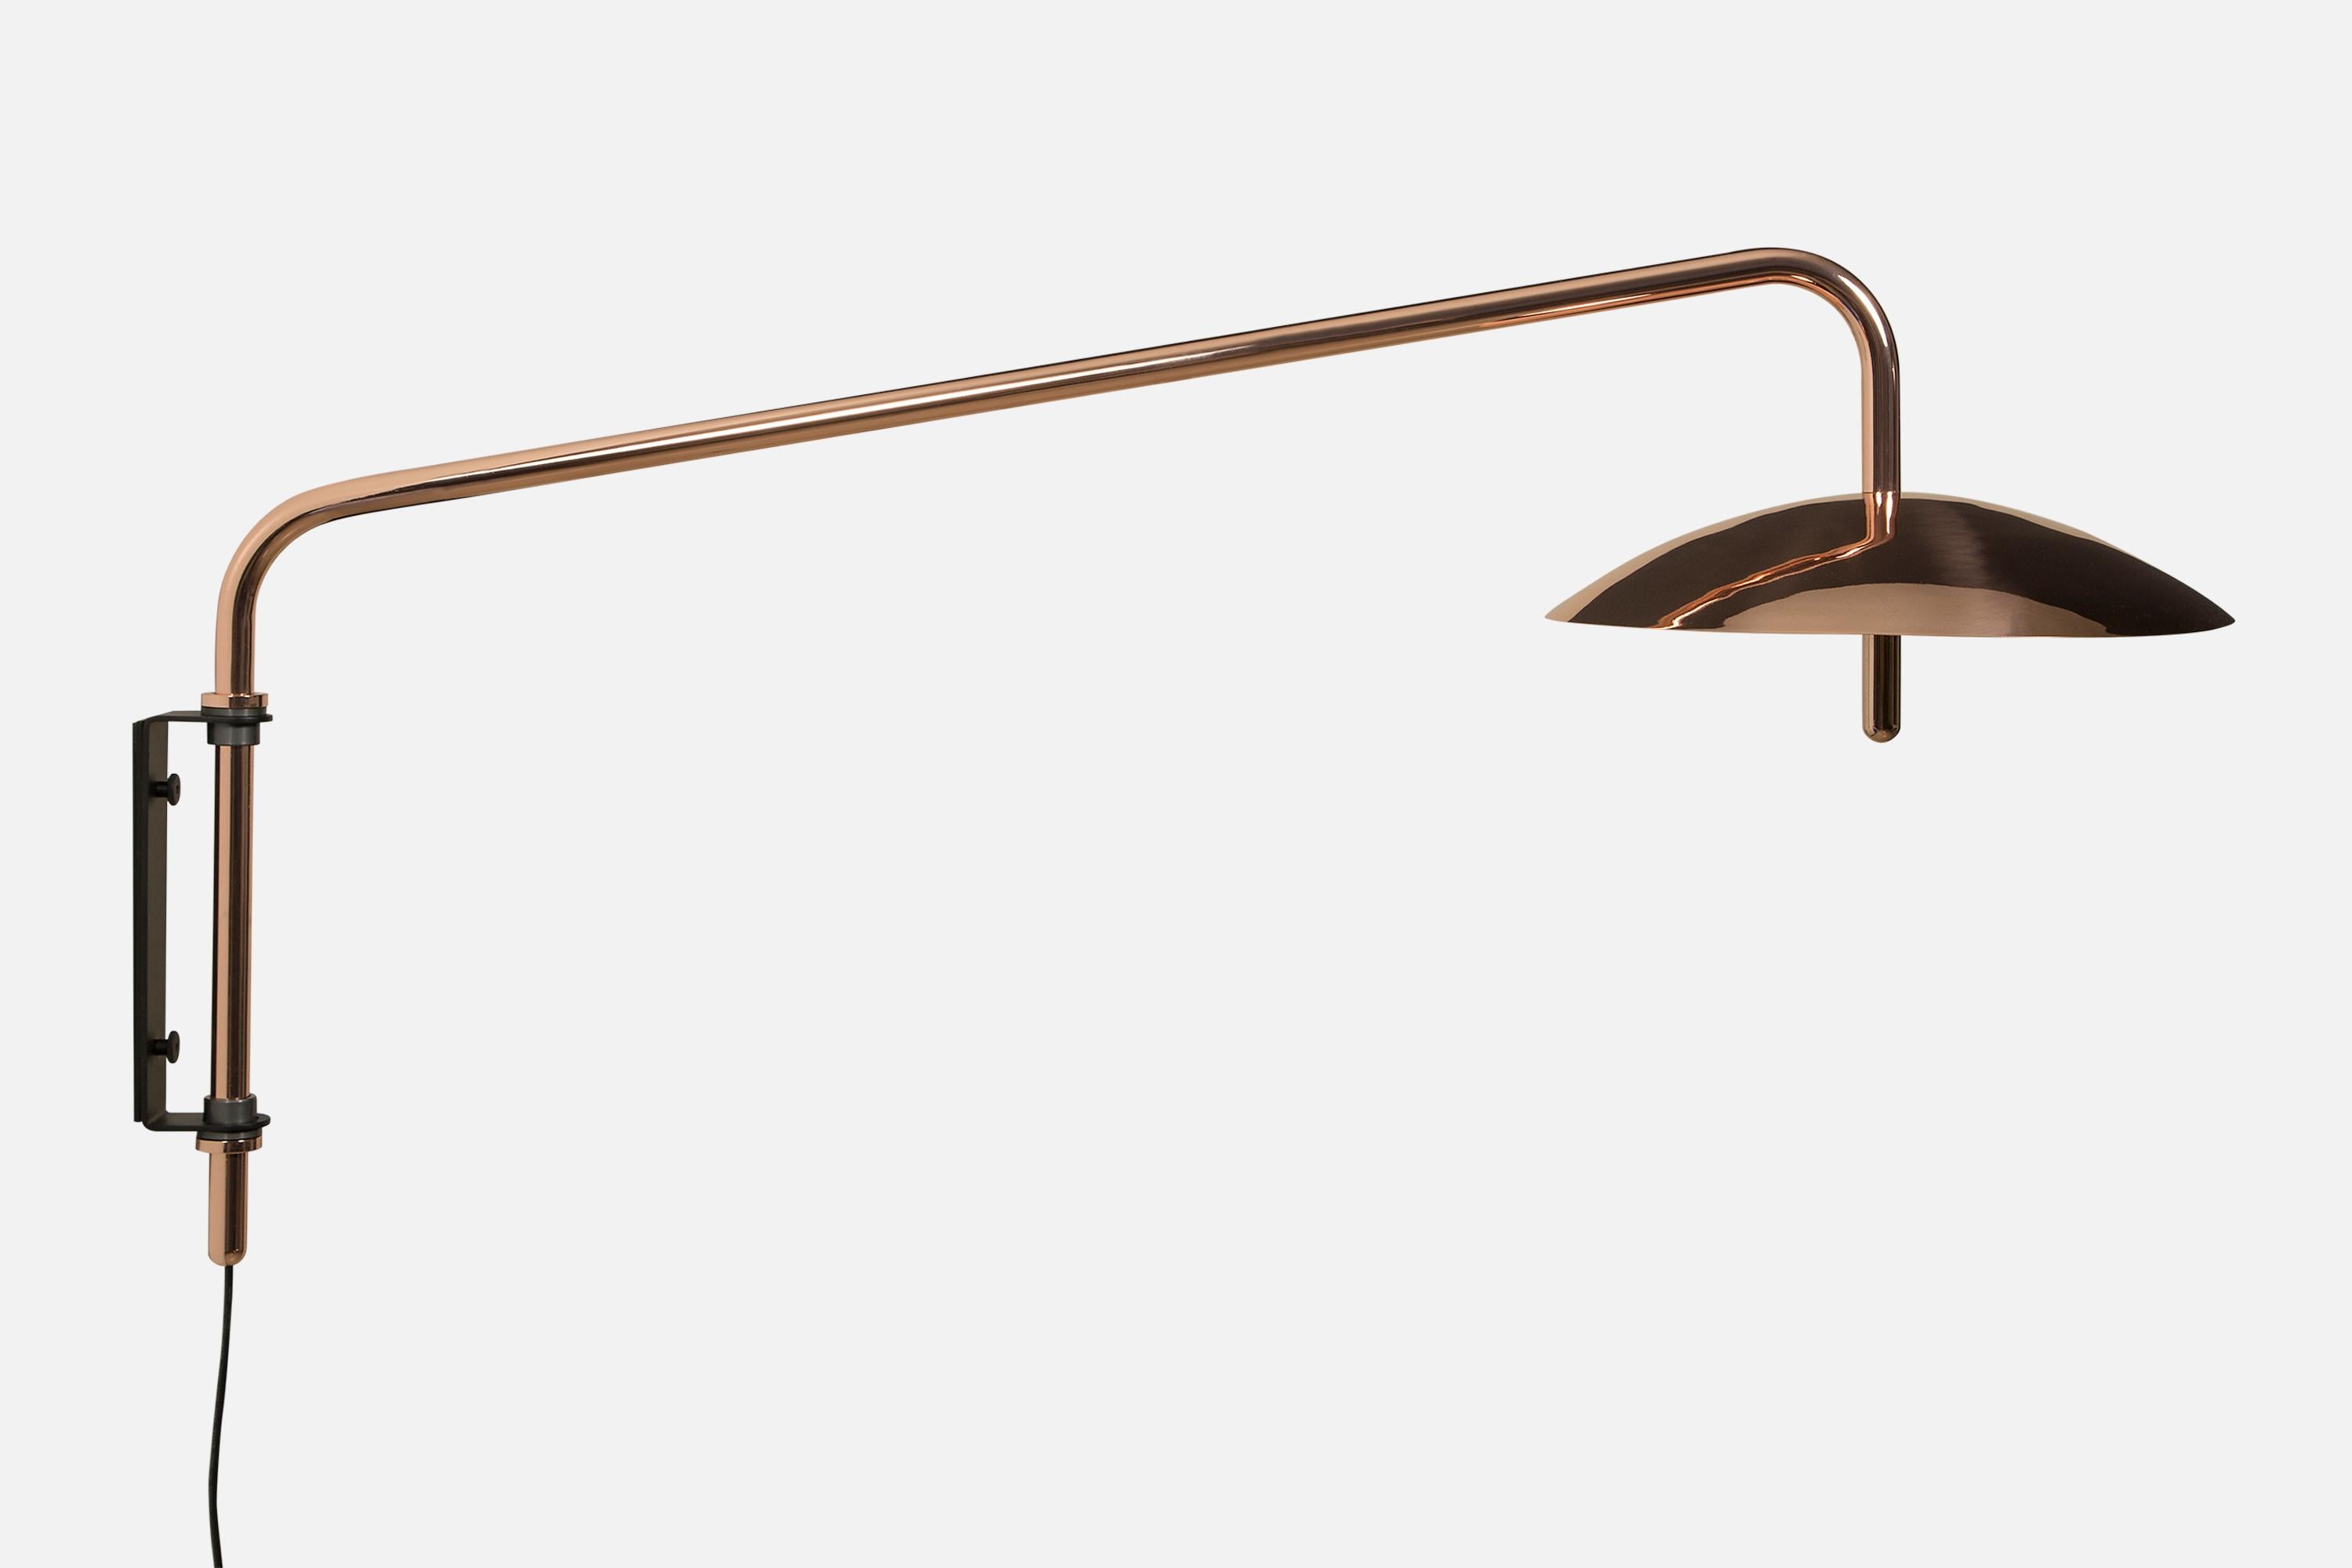 Metal Signal Arm Sconce in Black x Copper, Long, Hardwire, by Souda, Made to Order For Sale